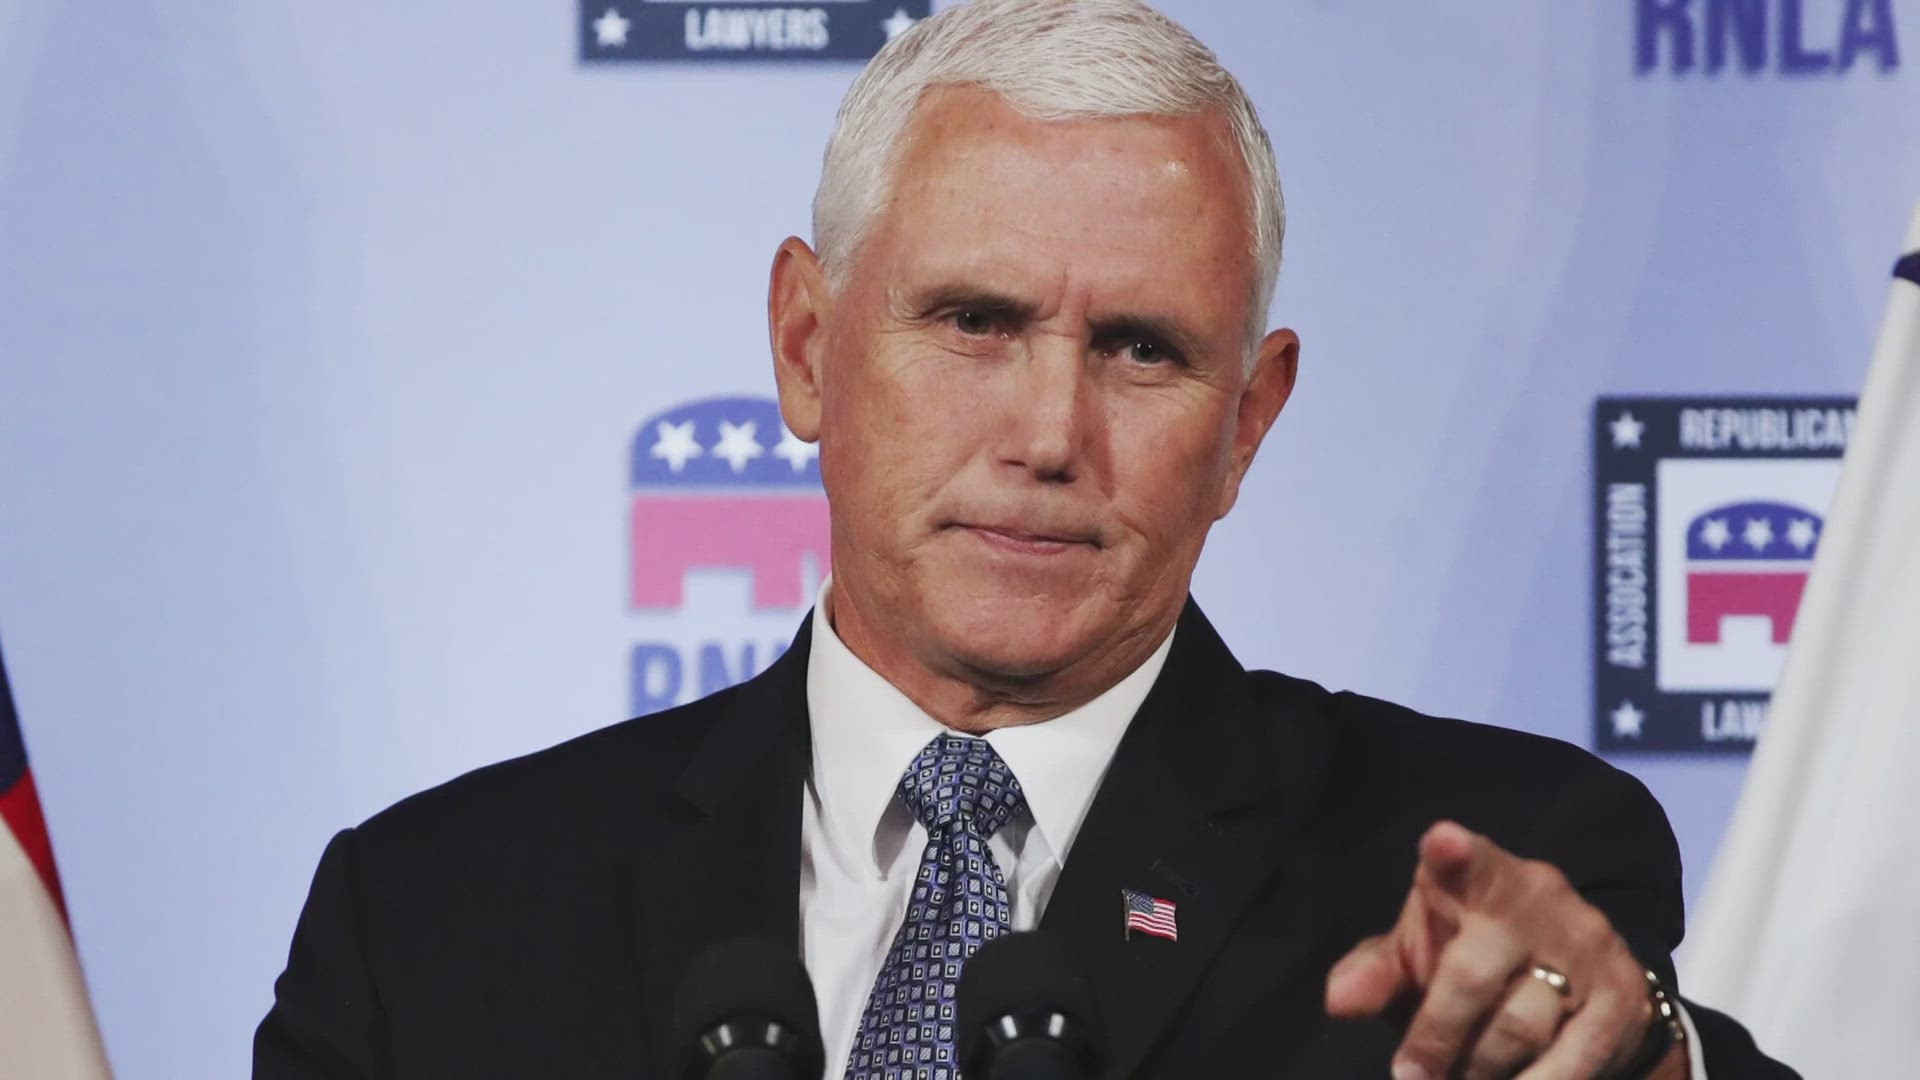 Pence will hold a kick off event in Des Moines.